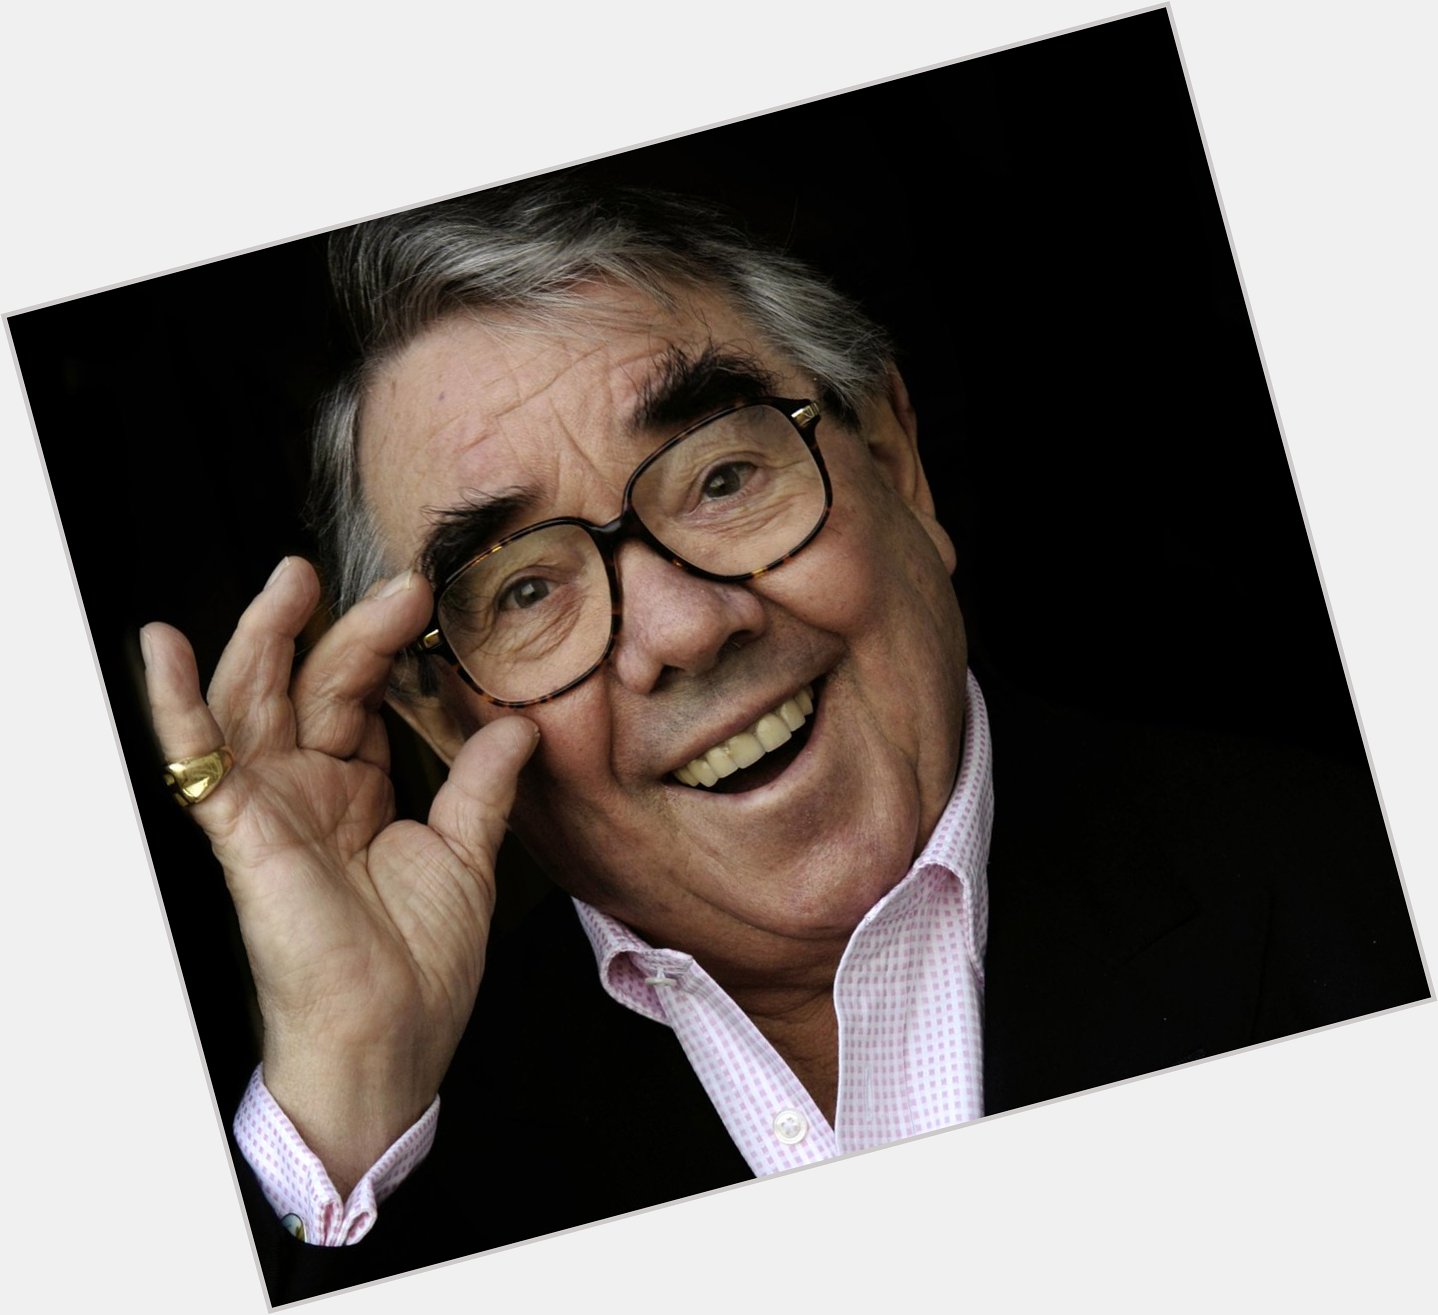 Good morning Edinburgh! And its happy birthday to him - Ronnie Corbett 84 years young 